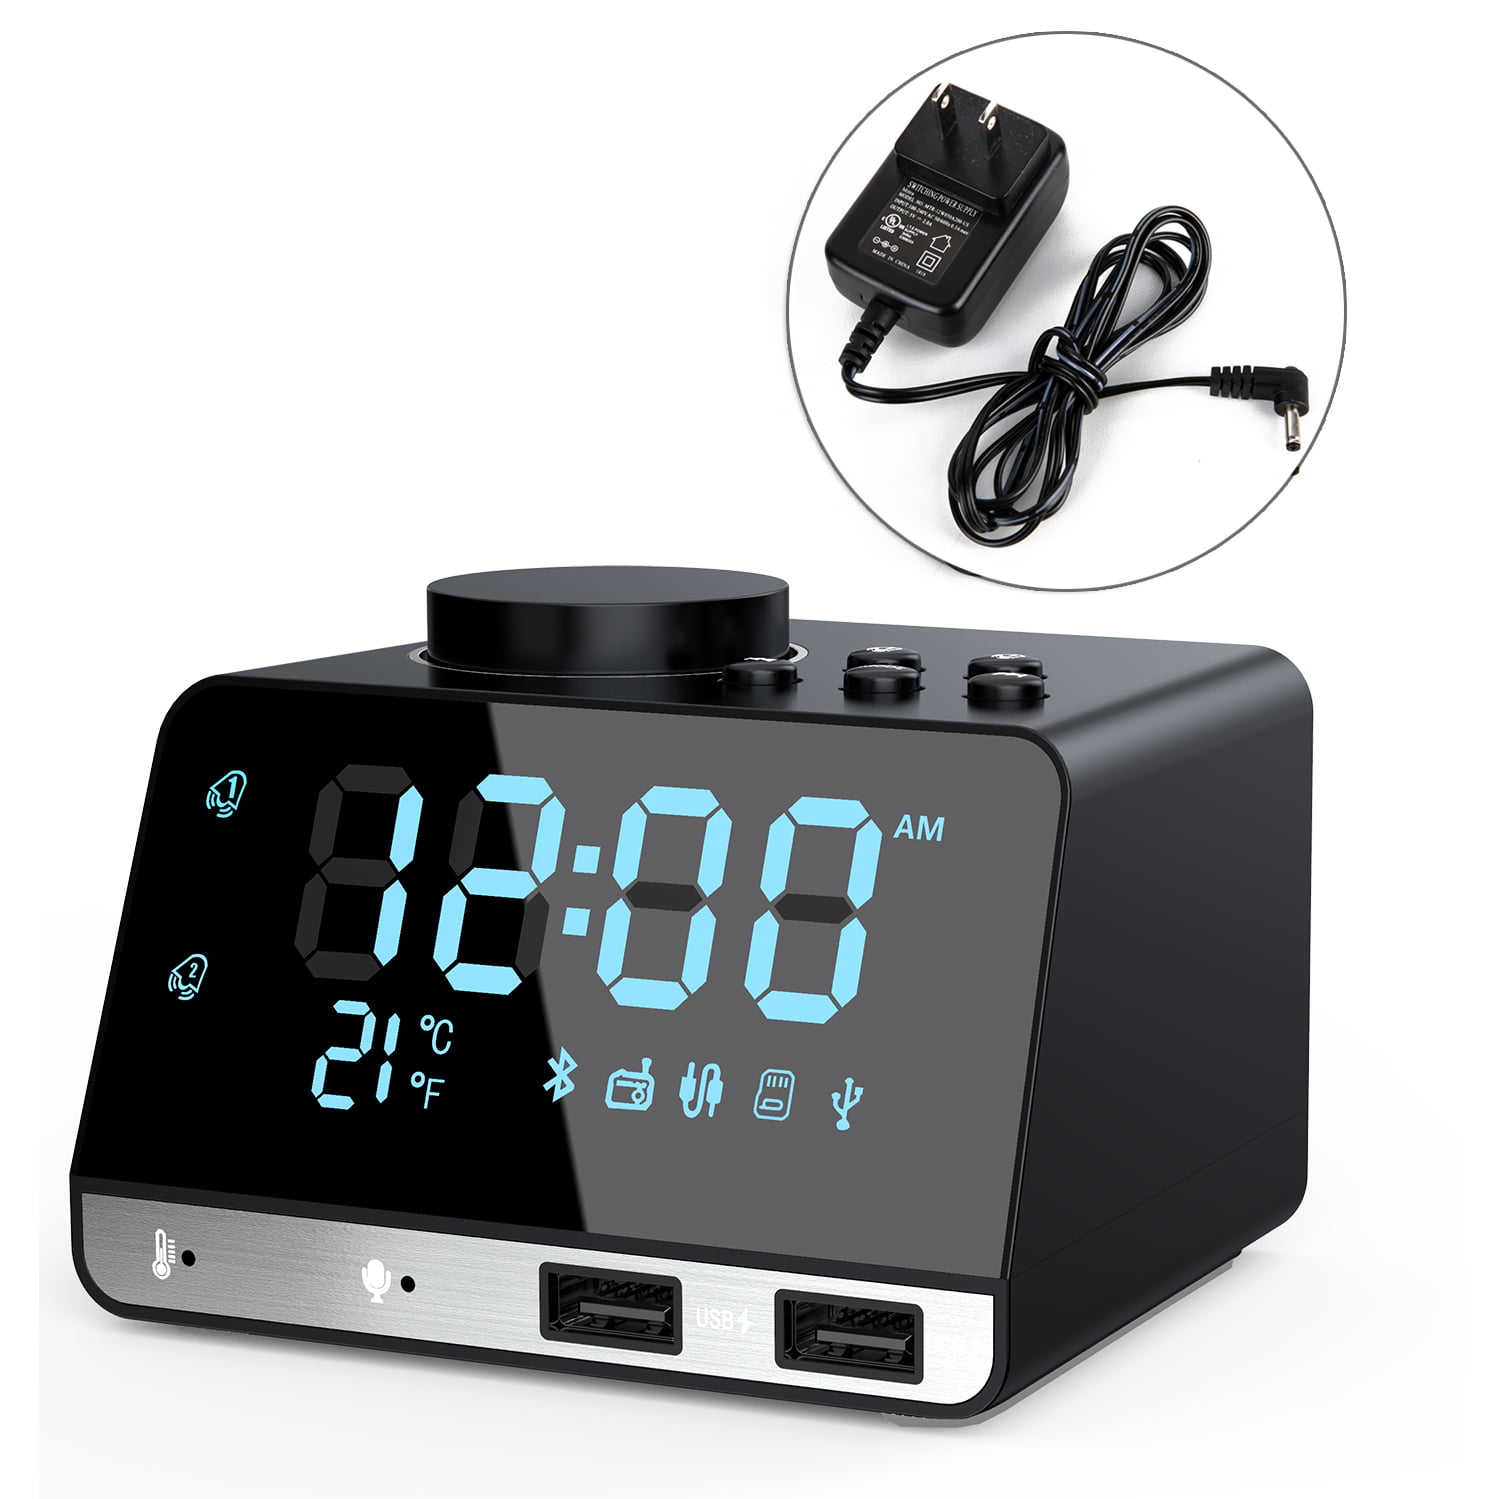 White Clock Radio Bluetooth V5.0 Portable Speaker with HD Sound and Bass,1.4 Inch Blue Display with Dimmer,Dual Alarm,Snooze,Backup Battery,Adjustable Alarm Volume Sleep Timer,USB Charging Port 